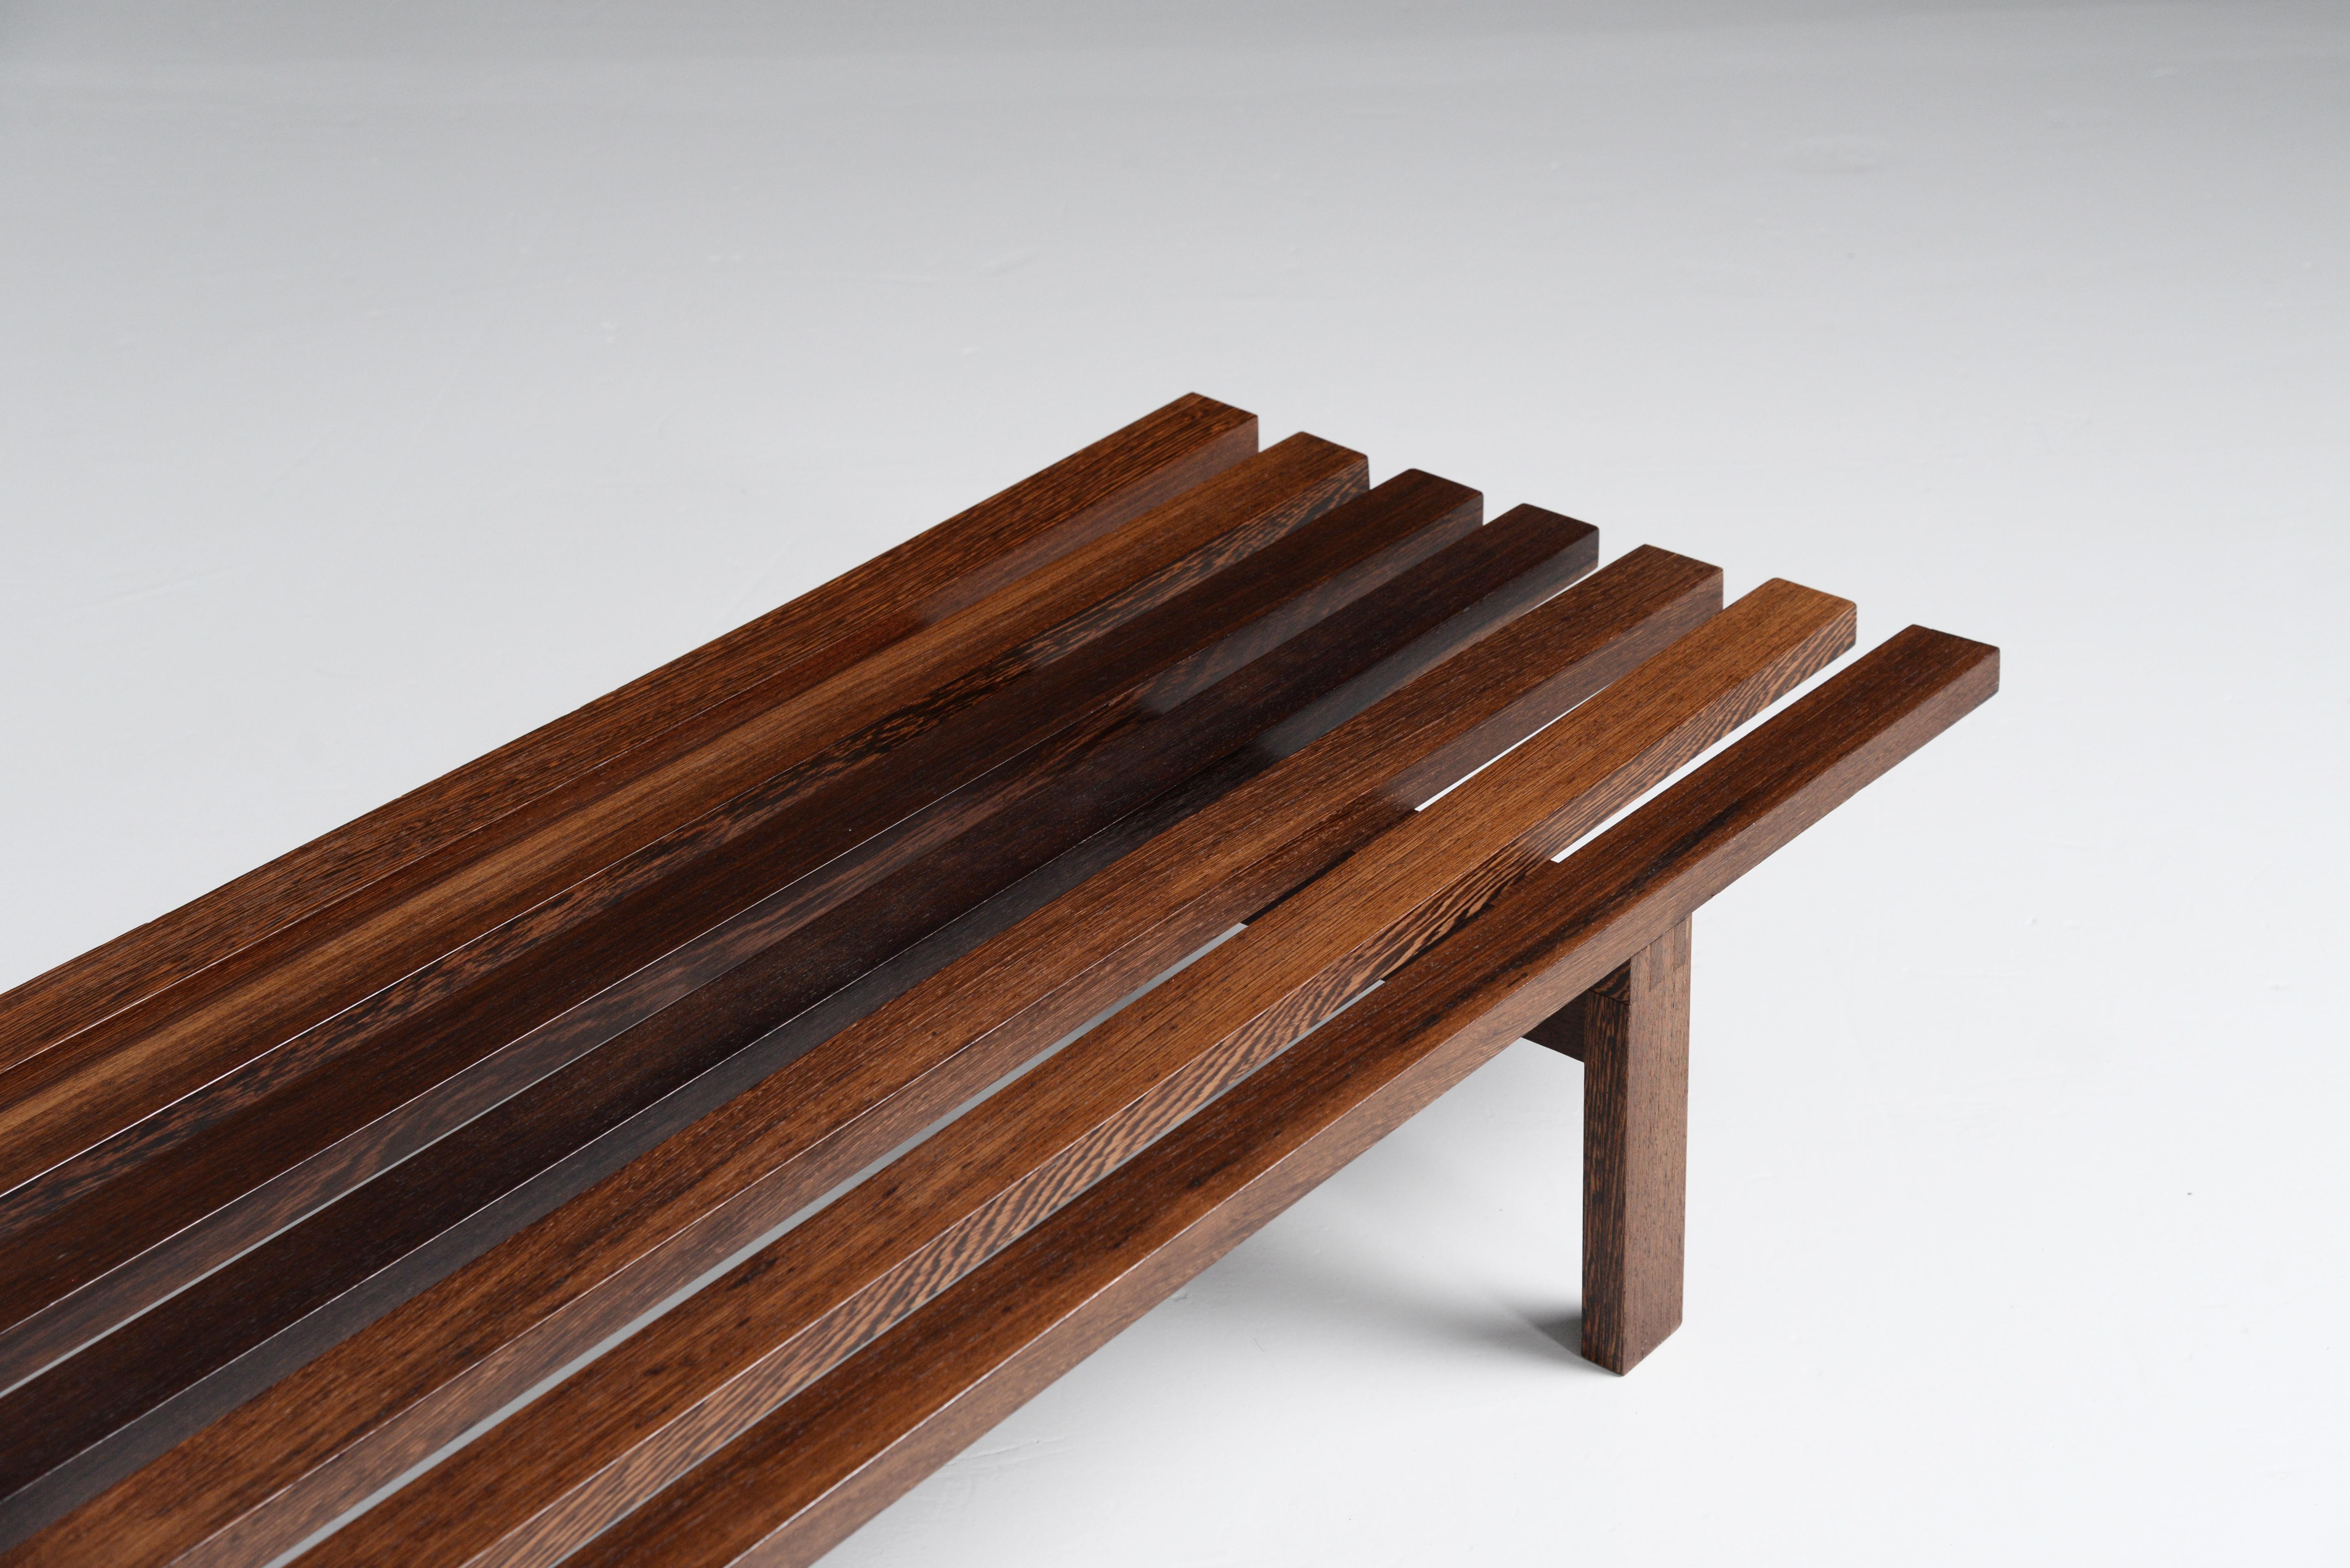 Very nice minimalist slat bench model BZ82 designed by Martin Visser and manufactured by ‘t Spectrum Bergeijk, Holland 1965. This slat bench is made of solid wenge wood, which has a very nice and unique appearance. Wenge is amongst the protected